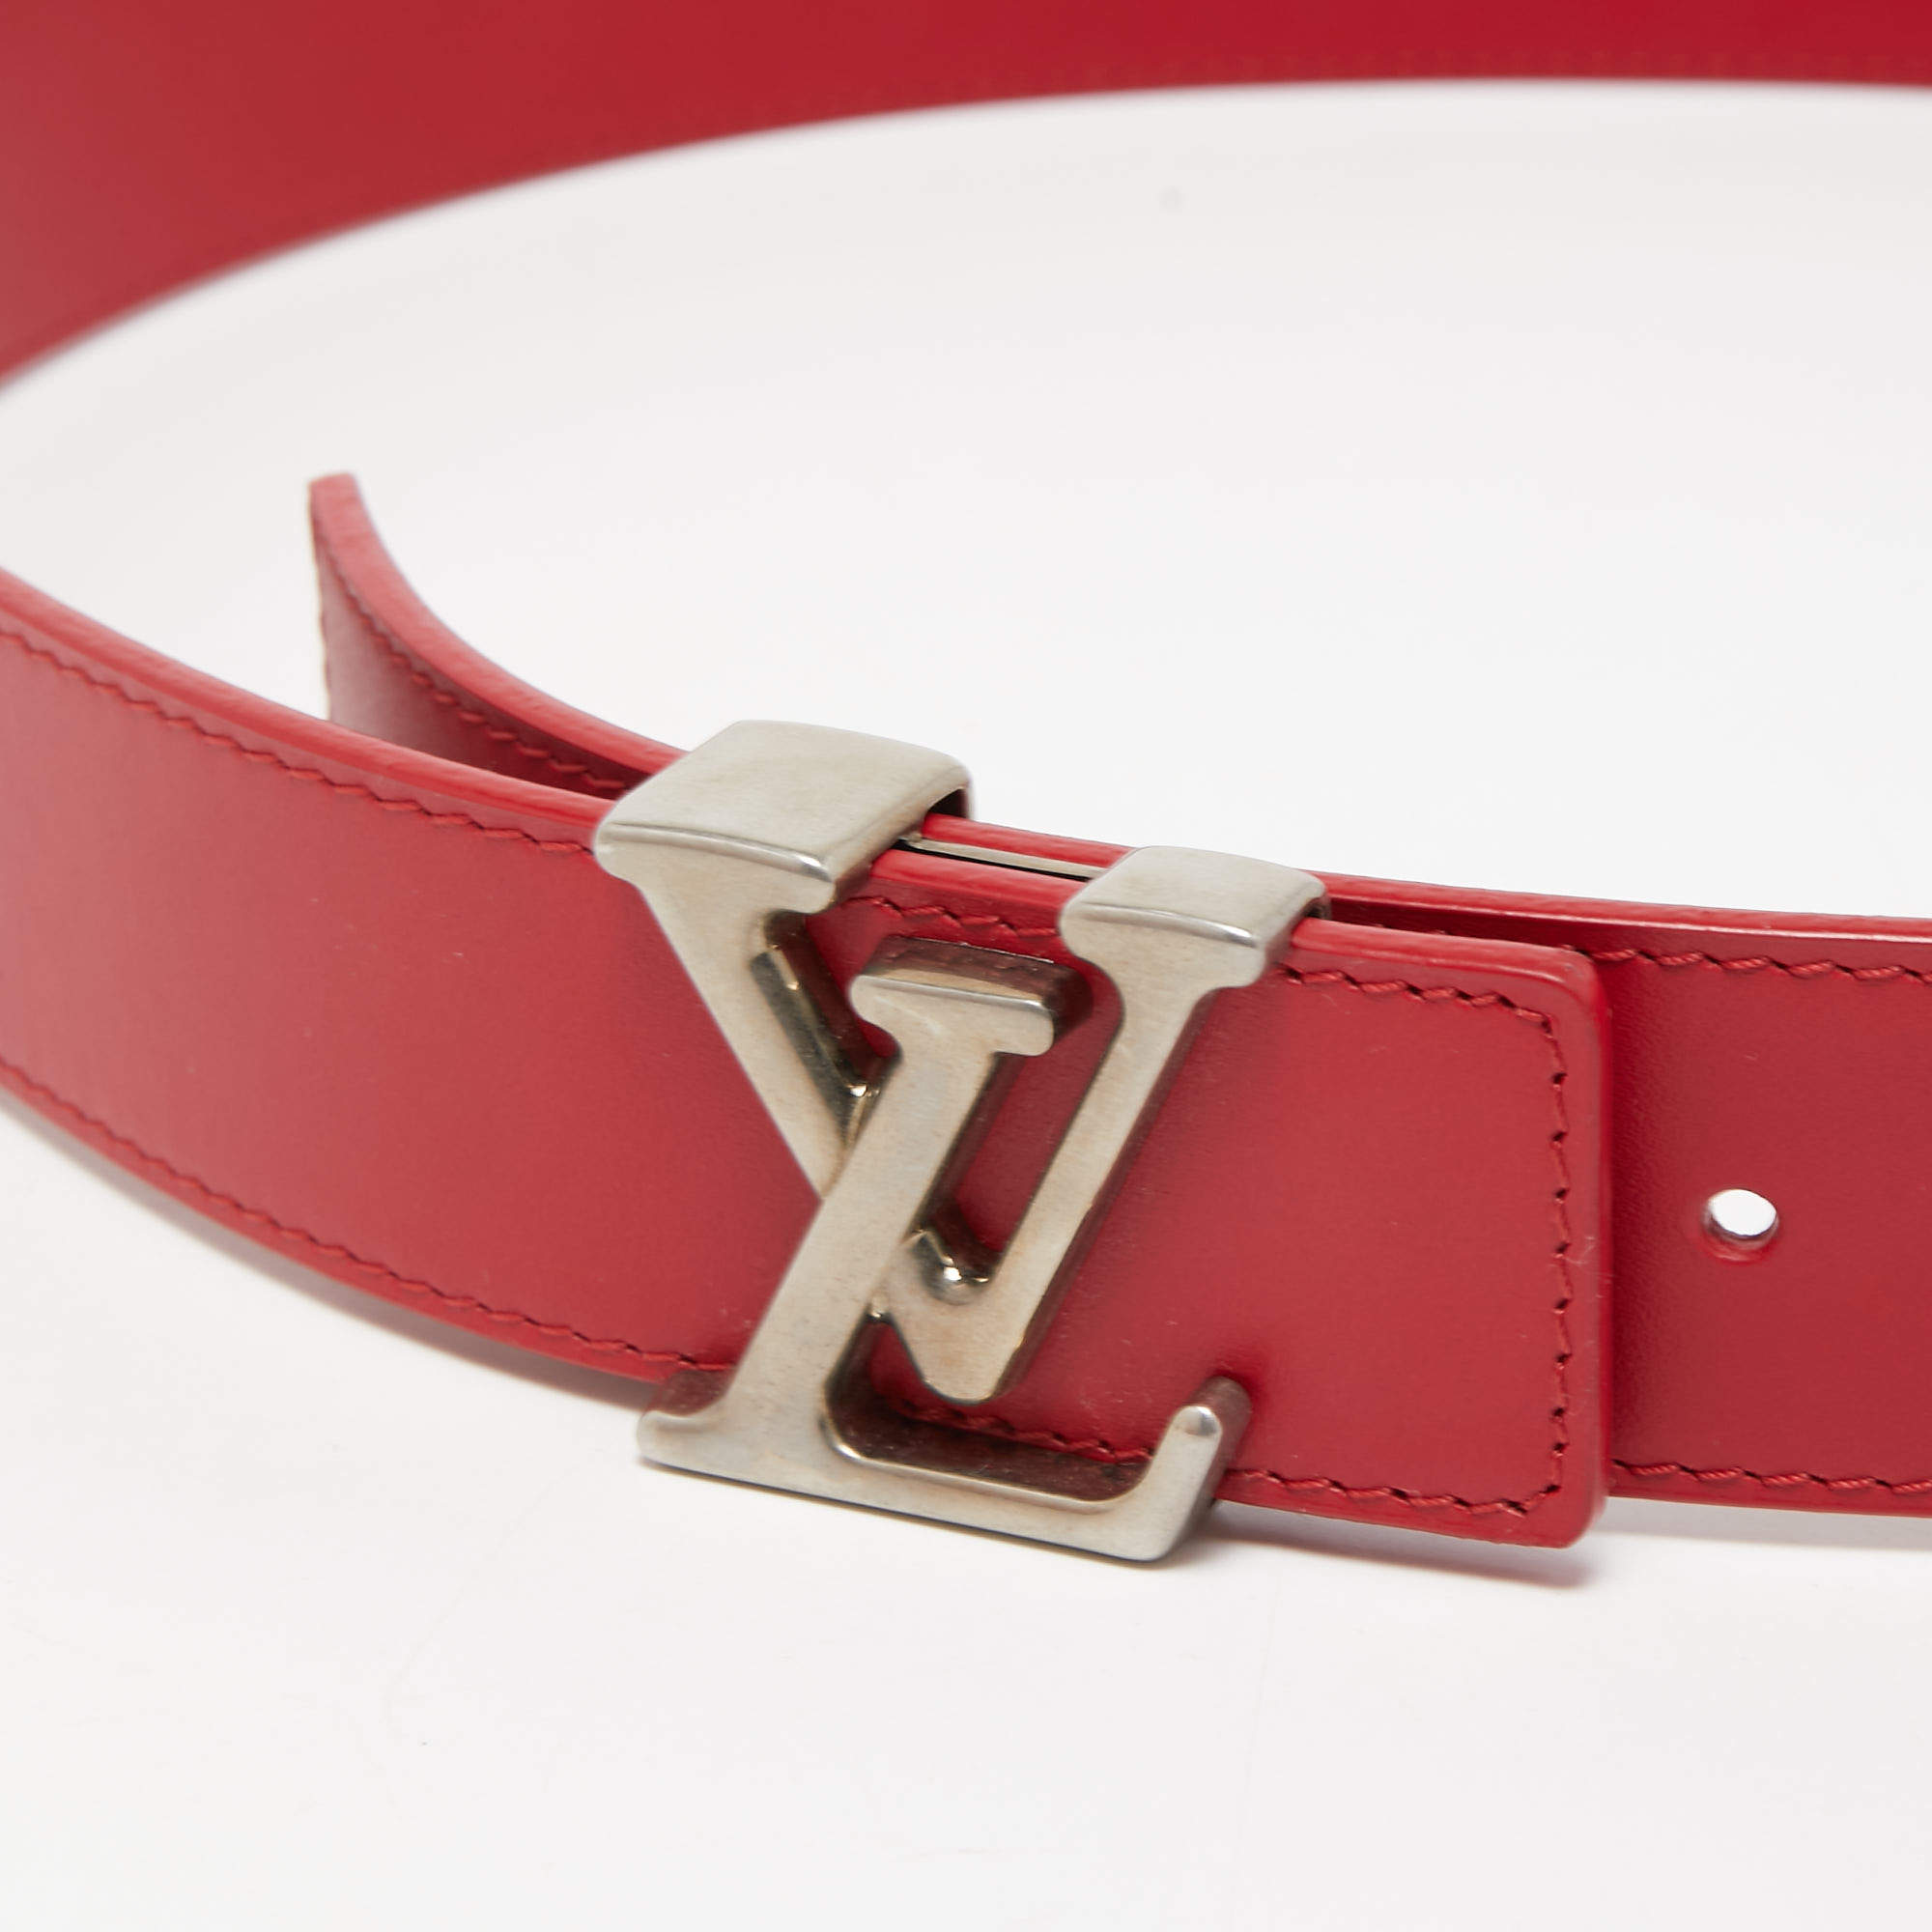 Leather belt Louis Vuitton Red size 85 cm in Leather - 25491445